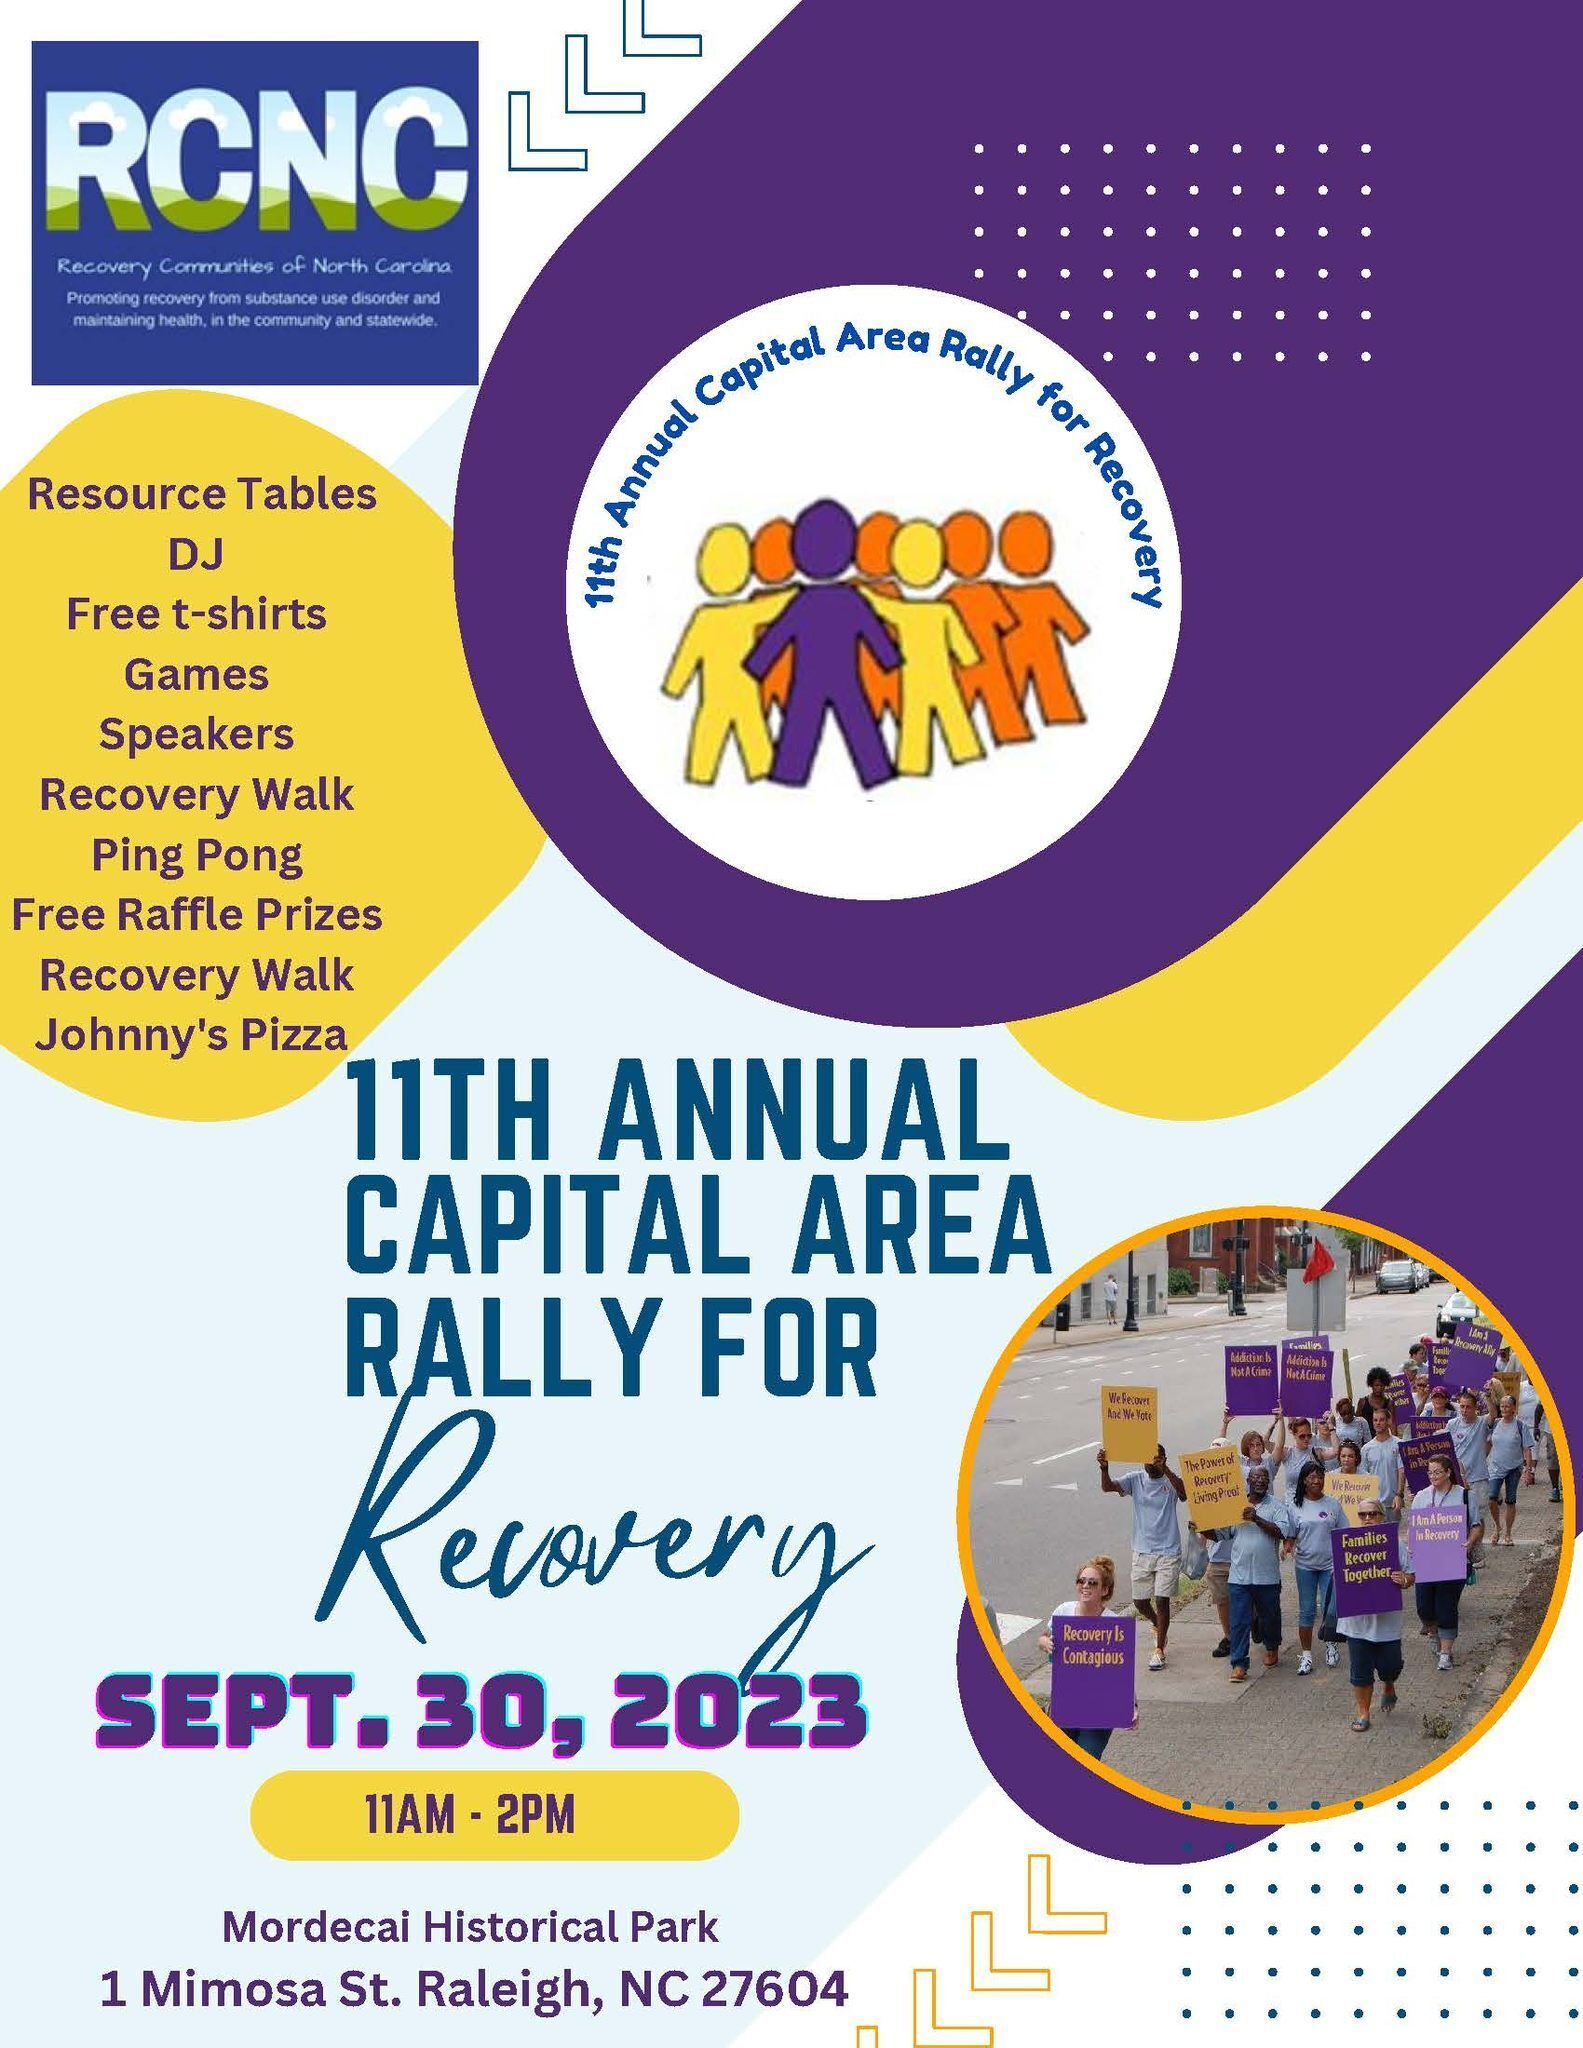 Join us for the 11th ANNUAL CAPITAL AREA RALLY FOR Recovery from 11 AM - 2 PM on SEPT. 30, 2023!